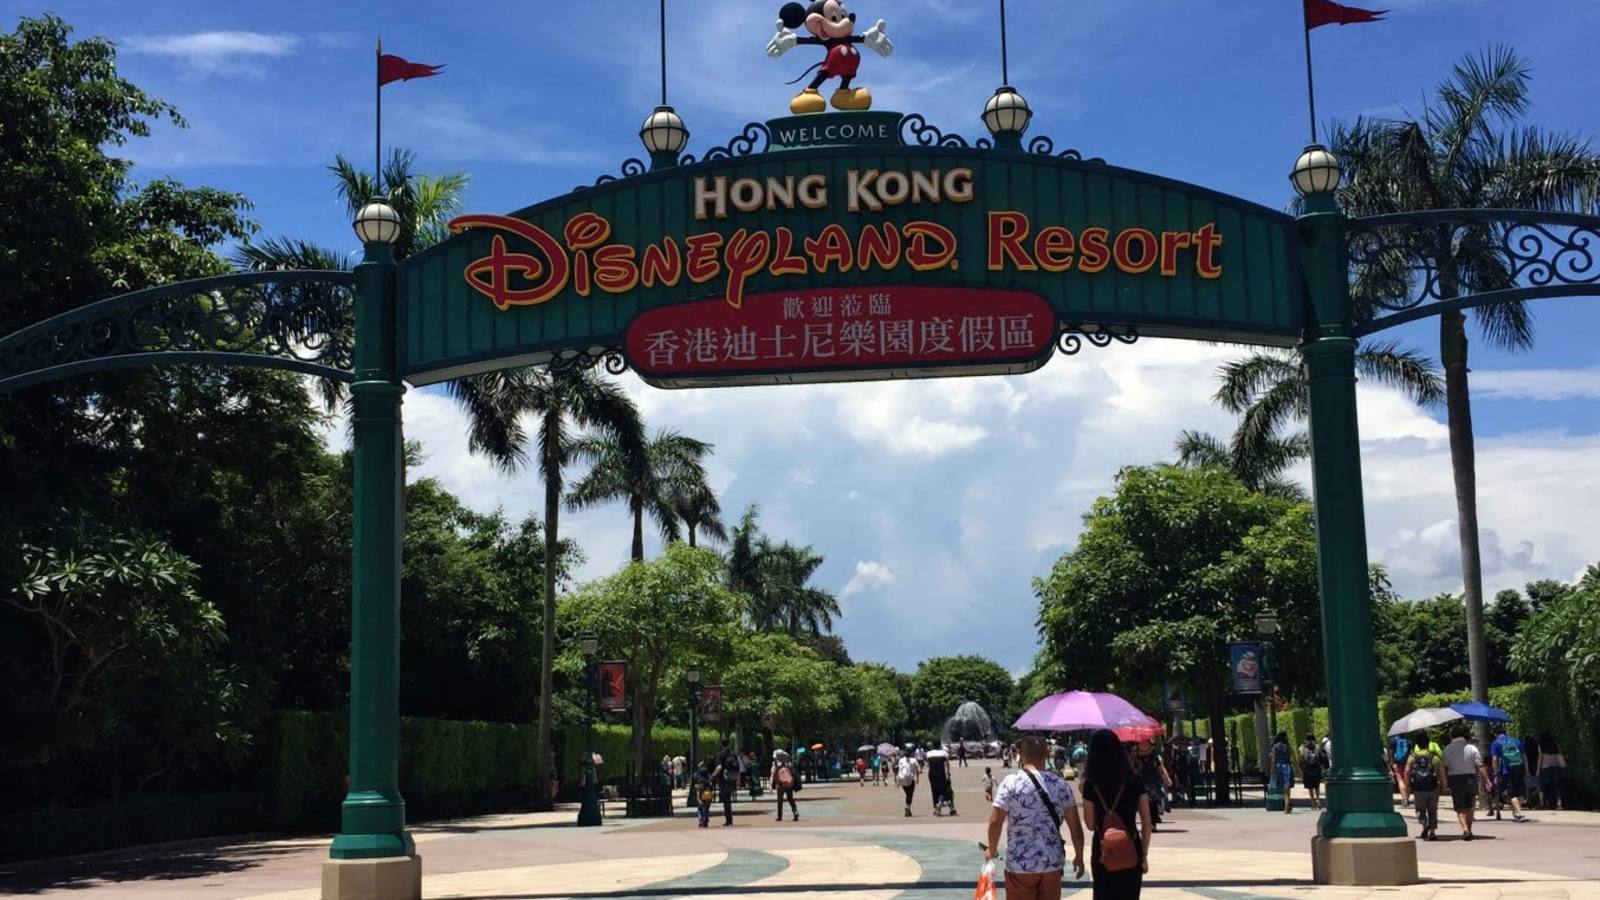 Insufficient size for cost lament Hong Kong Disneyland visitors